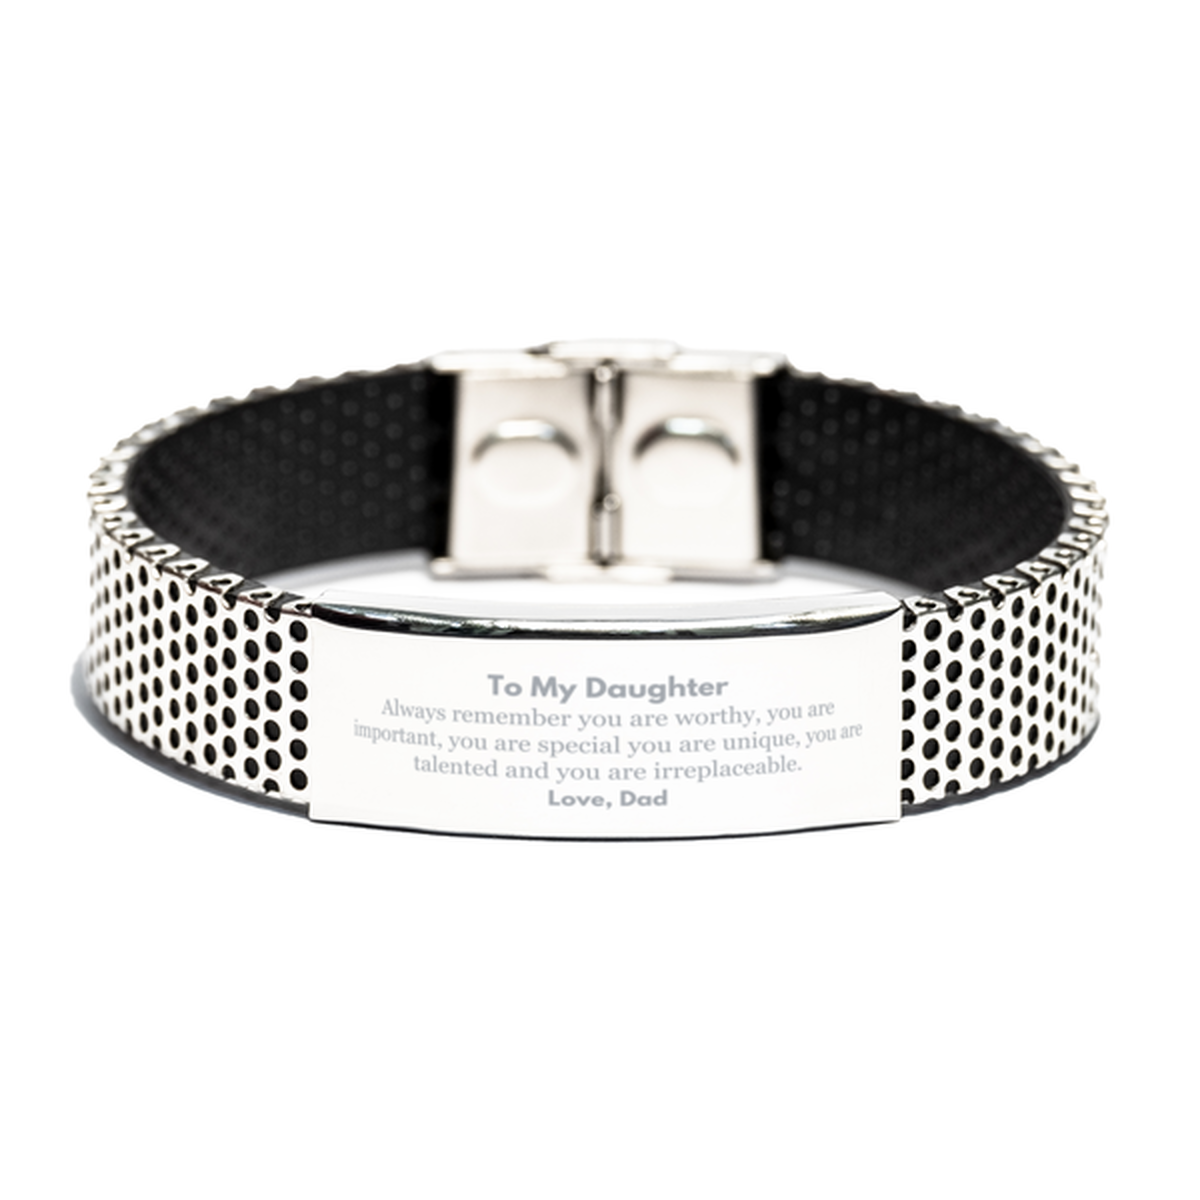 Daughter Birthday Gifts from Dad, Inspirational Stainless Steel Bracelet for Daughter Christmas Graduation Gifts for Daughter Always remember you are worthy, you are important. Love, Dad